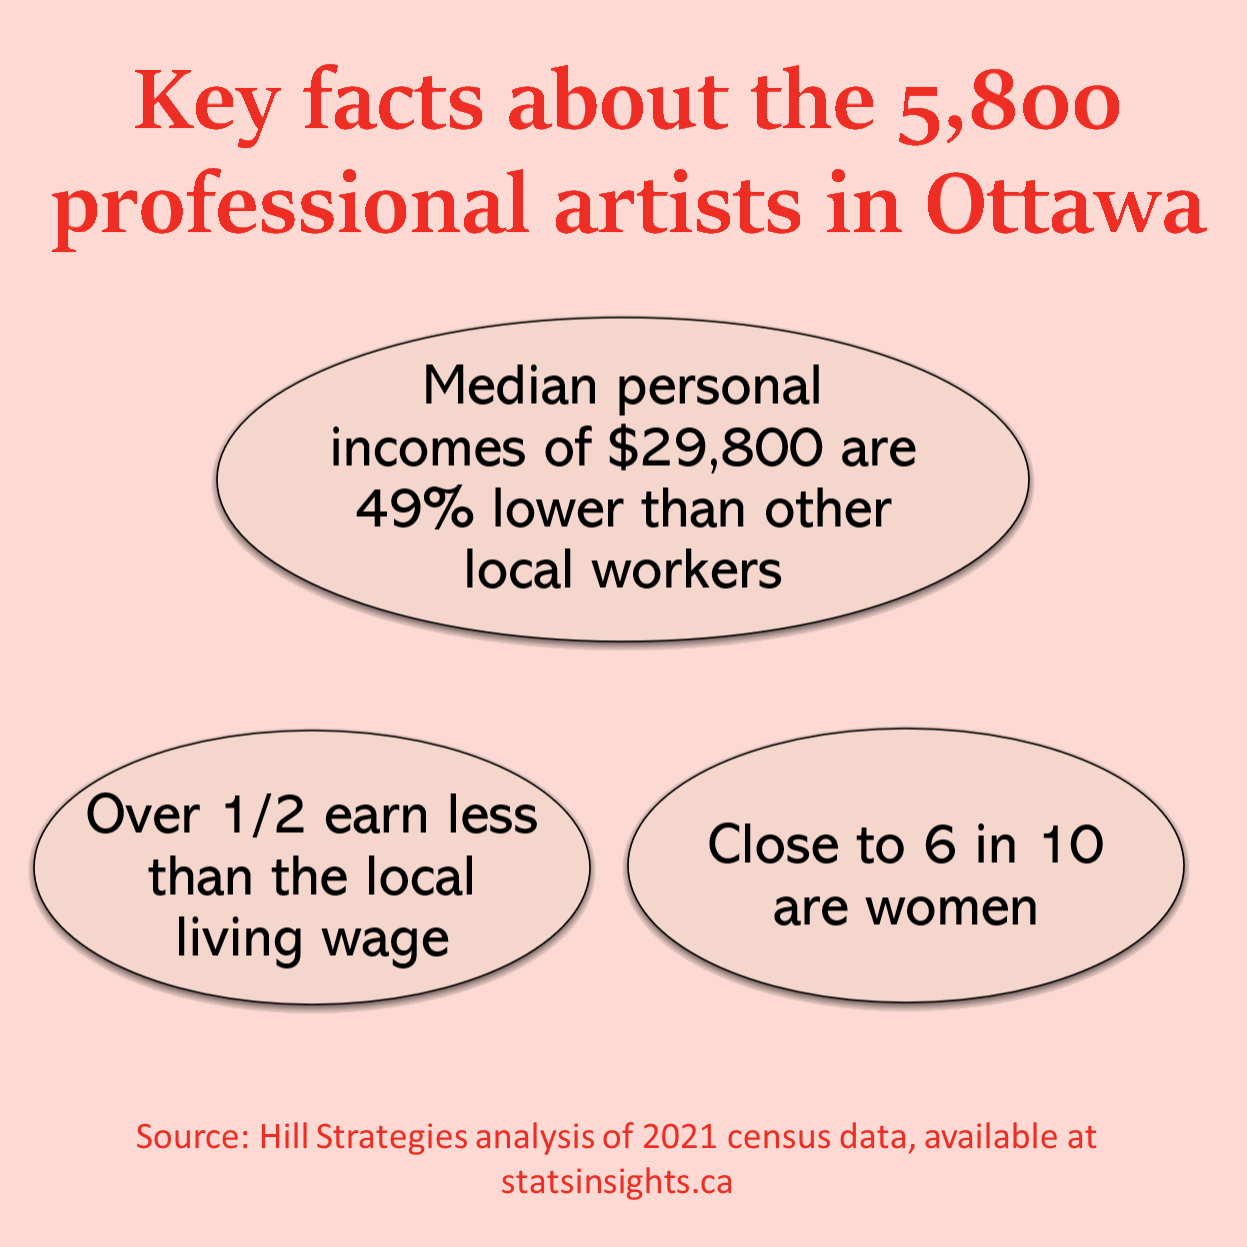 Graphic of key facts about the 5,800 professional artists in the City of Ottawa. Median personal income of $29,800 is 49% lower than other local workers. Over one-half earn less than the local living wage. Close to 6 in 10 are women. Source: Hill Strategies analysis of 2021 census data at http://www.statsinsights.ca.